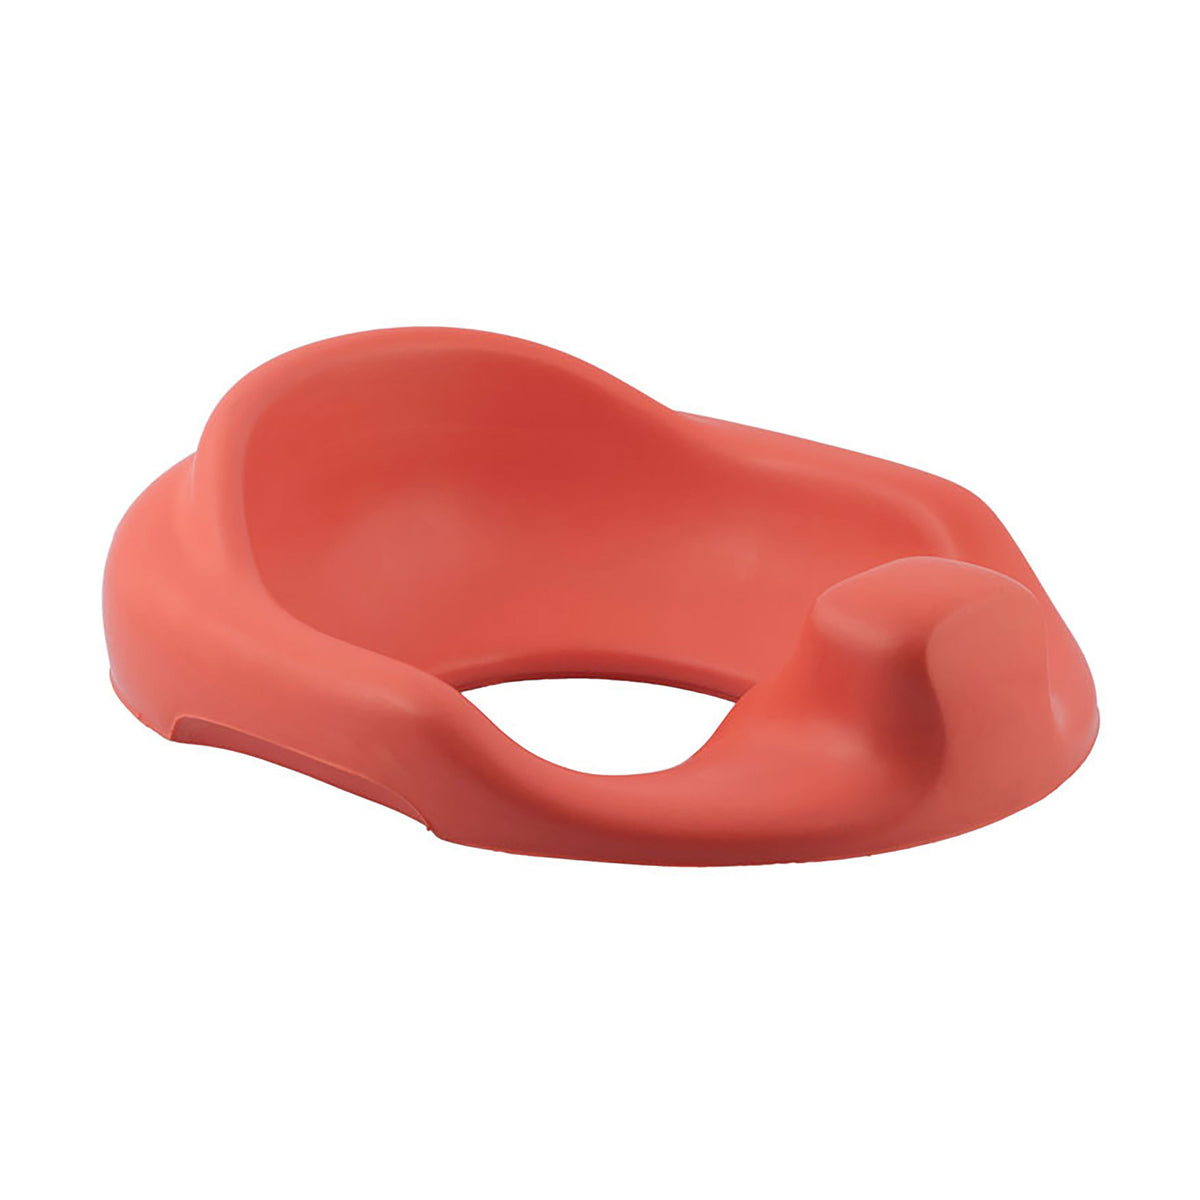 bumbo-toilet-trainer-coral- (1)